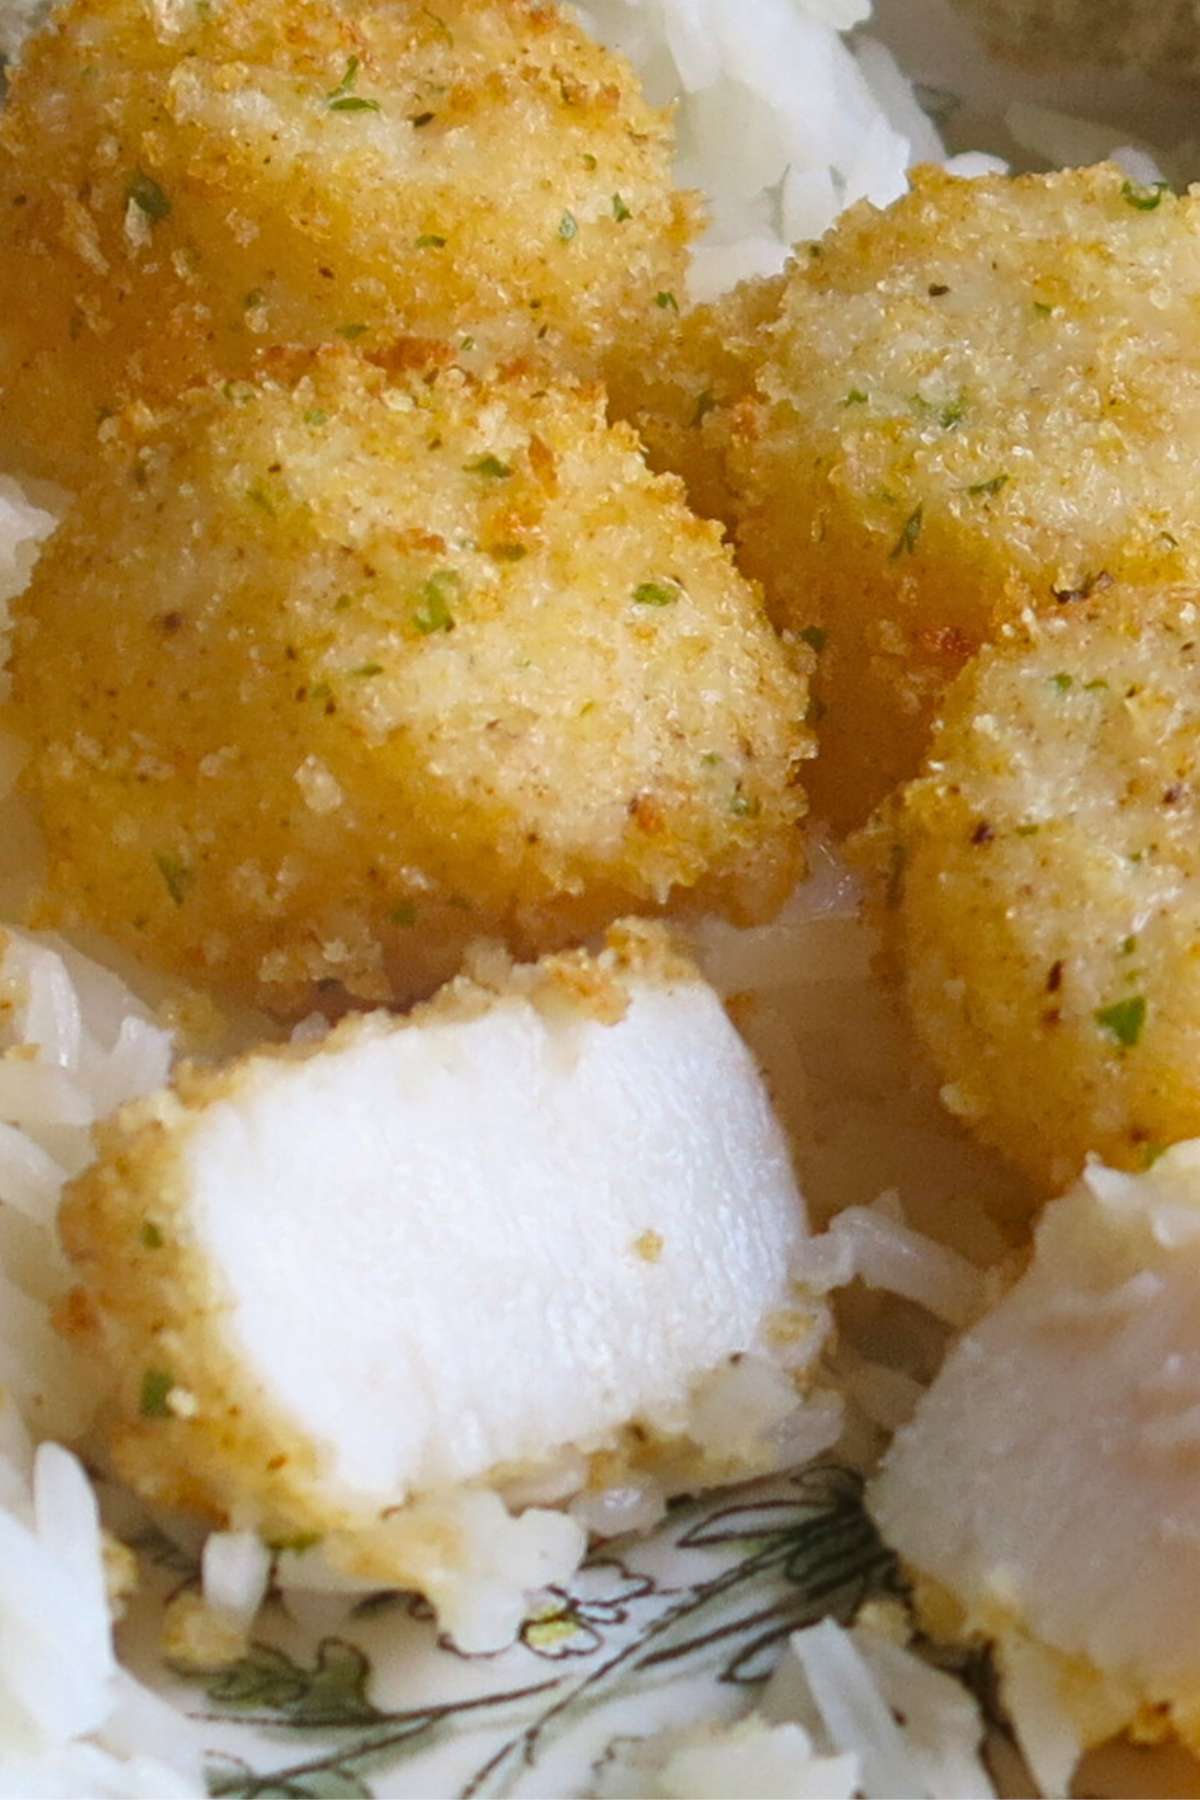 Broiled scallops with Parmesan breading on a plate over rice with one cut in half to expose the moist, white center.